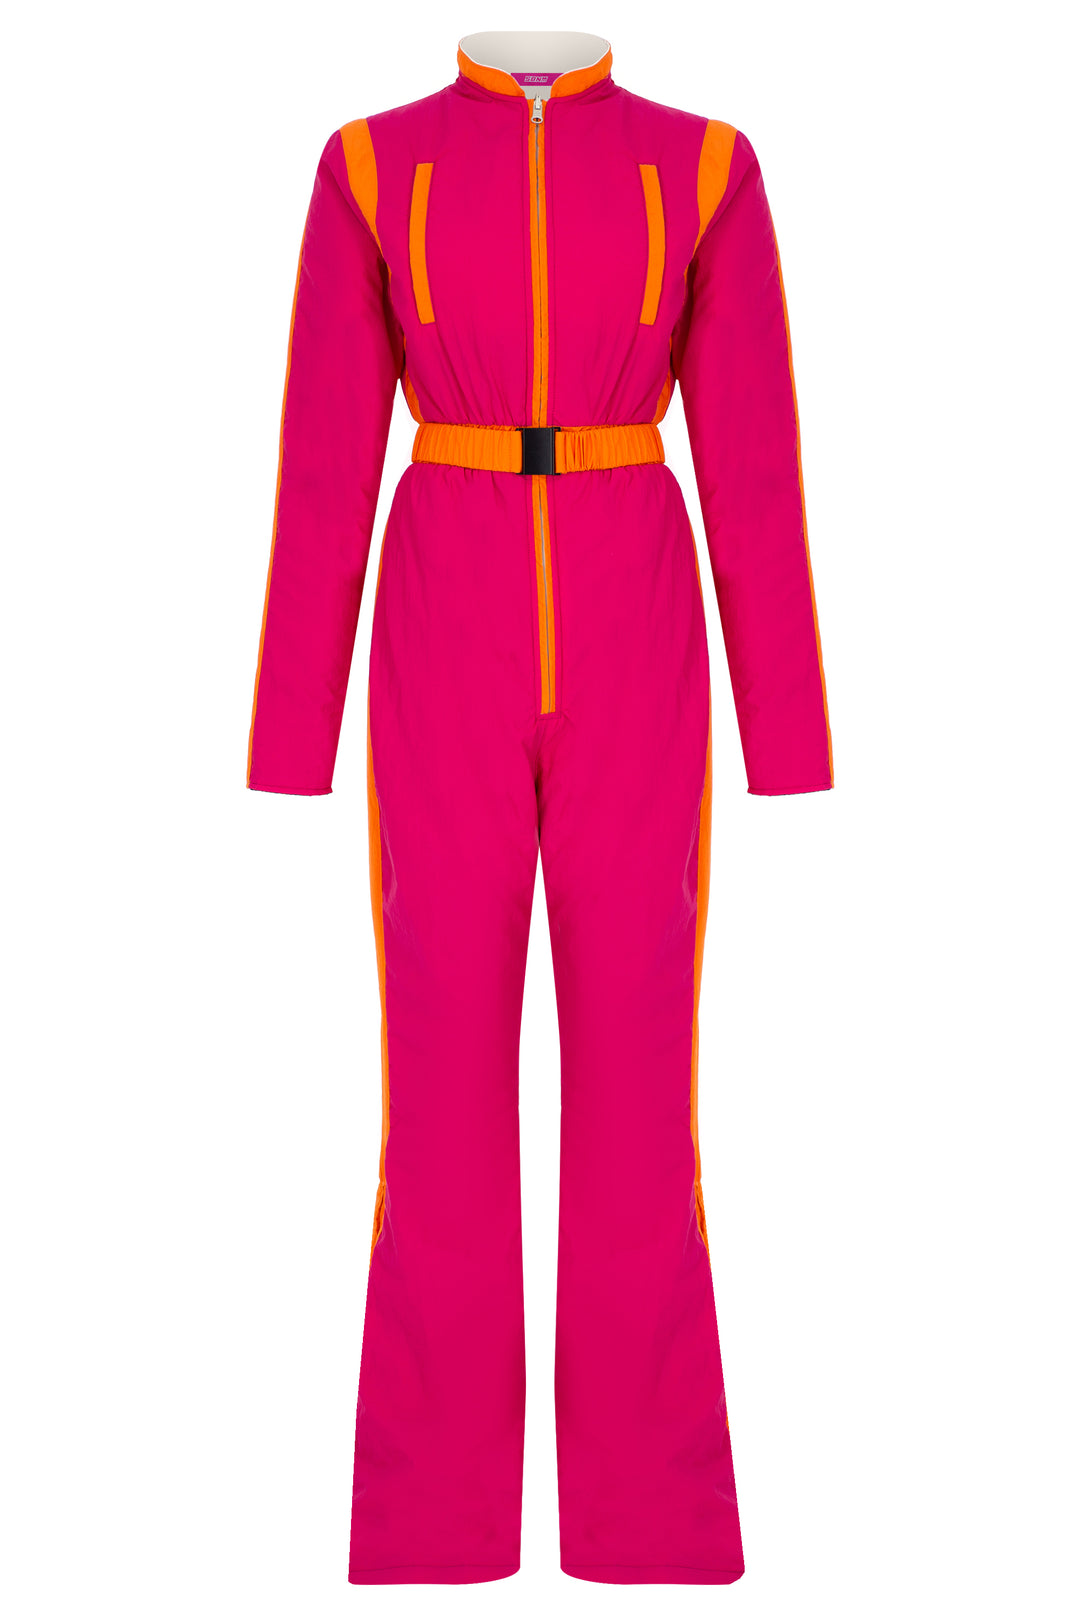 Pink Signature Double Sided Ski Suit